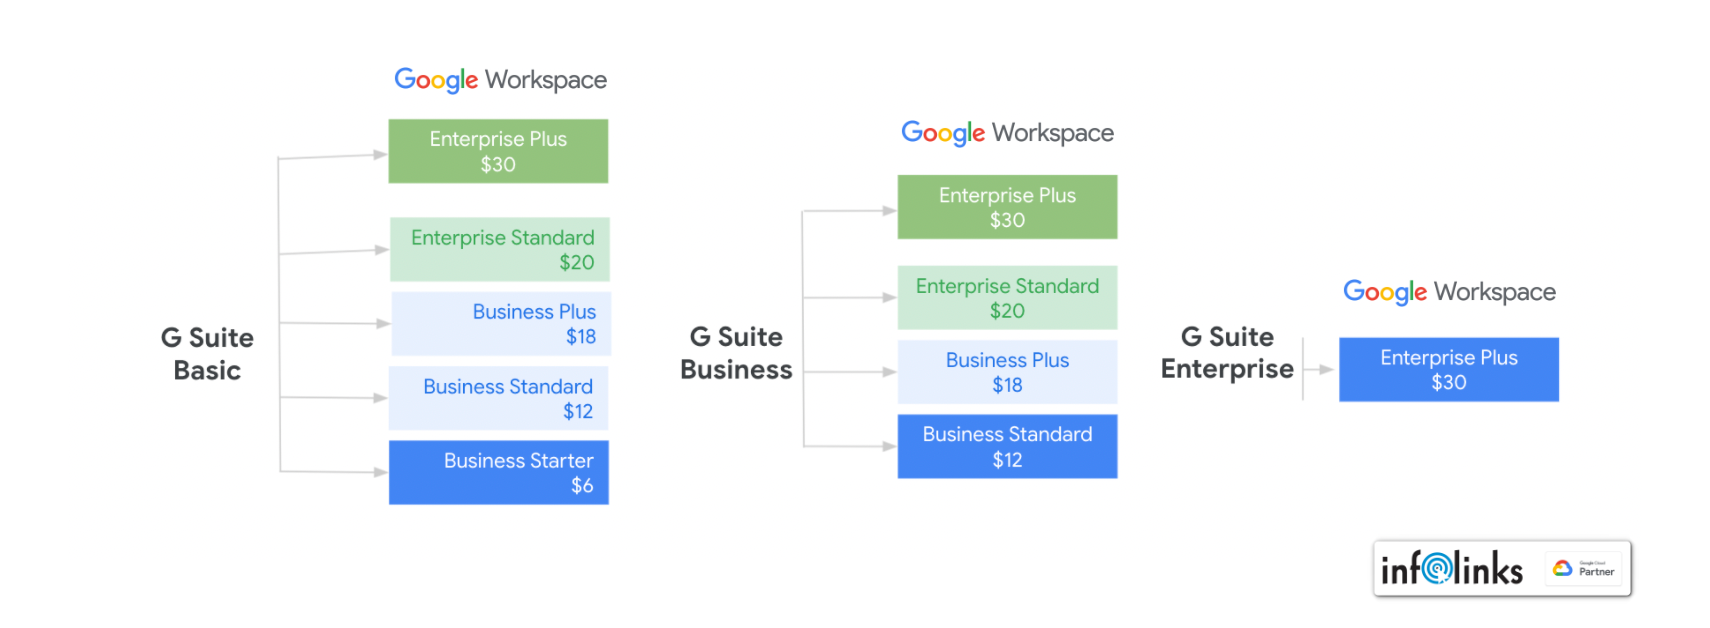 Service transition information from G Suite to Google Workspace